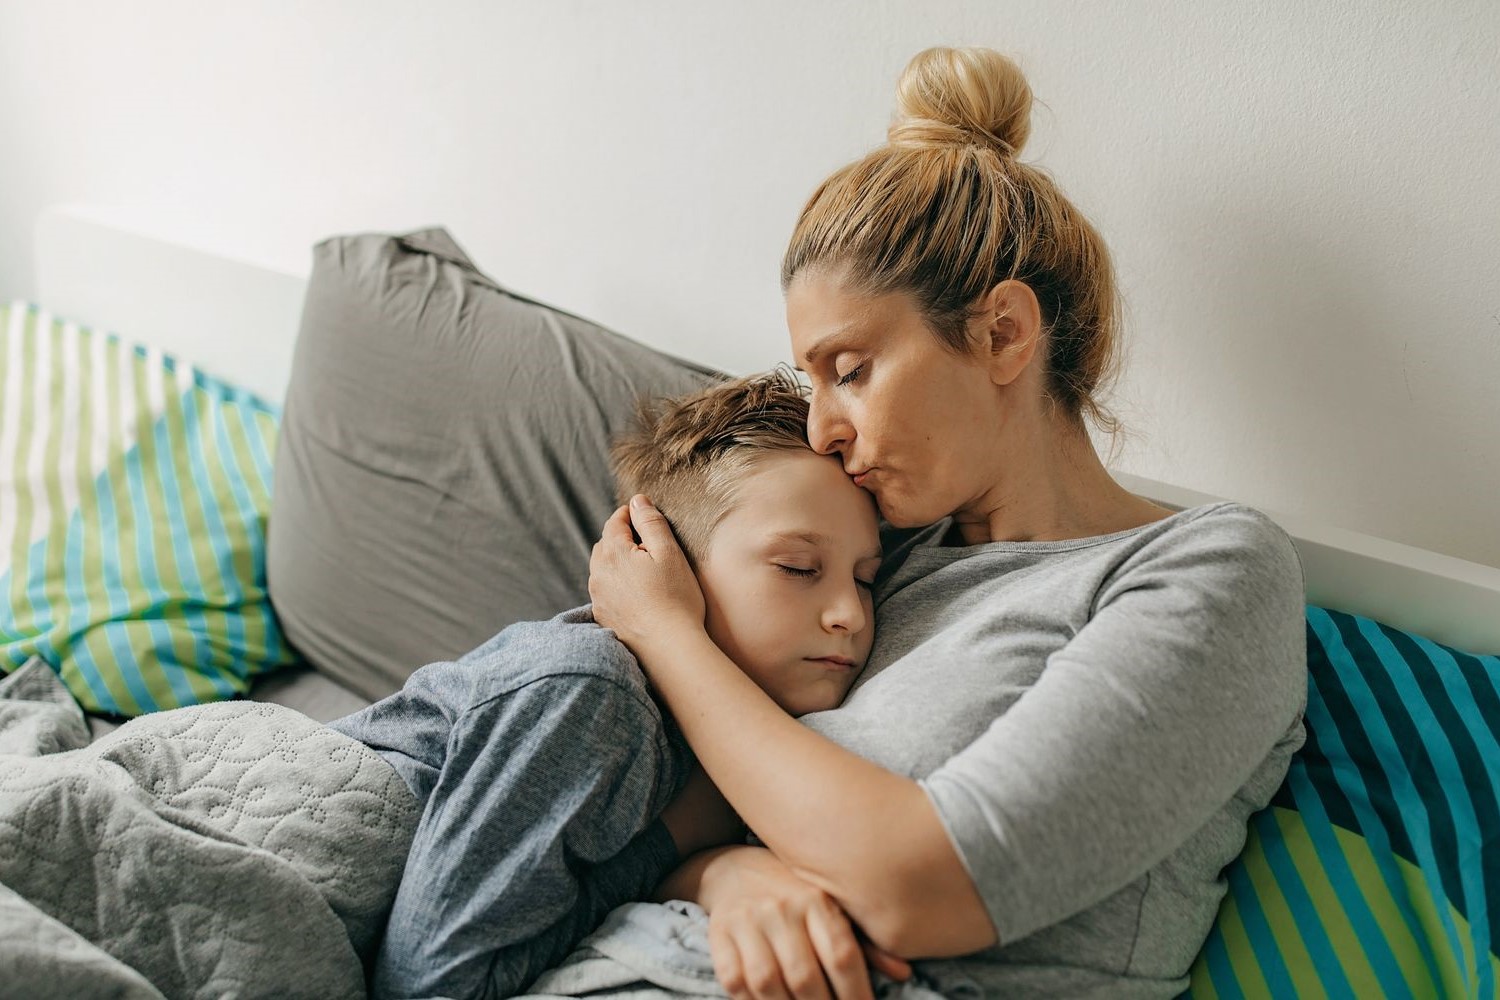 The Surprising Reason Why This Mom Slept With Her 6-Year-Old Son